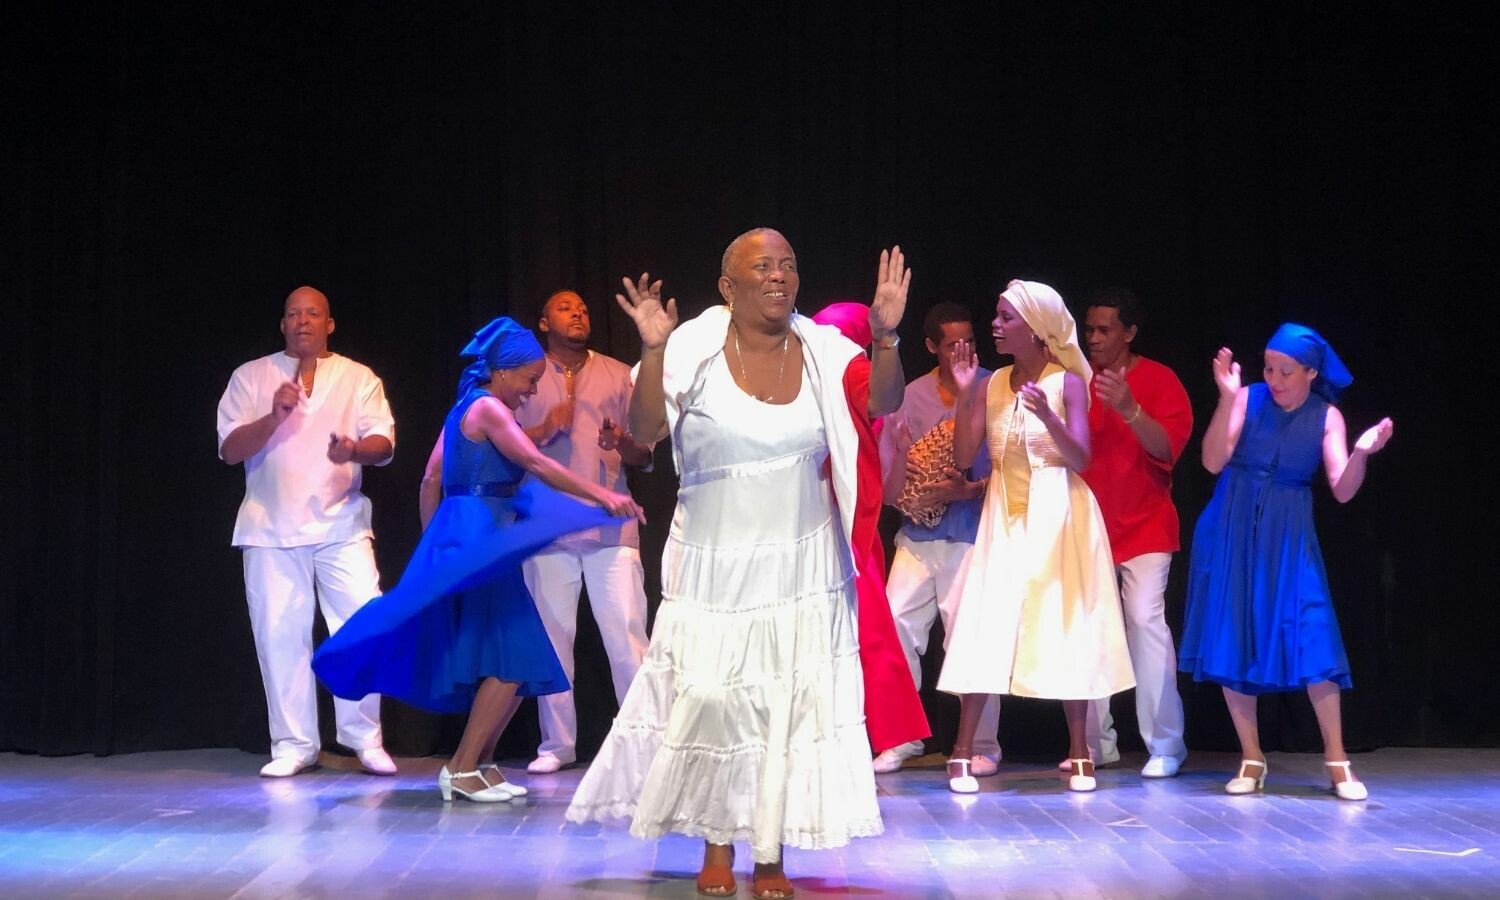 A woman in a white dress with short hair dancing with an ensemble of other women and men behind her.